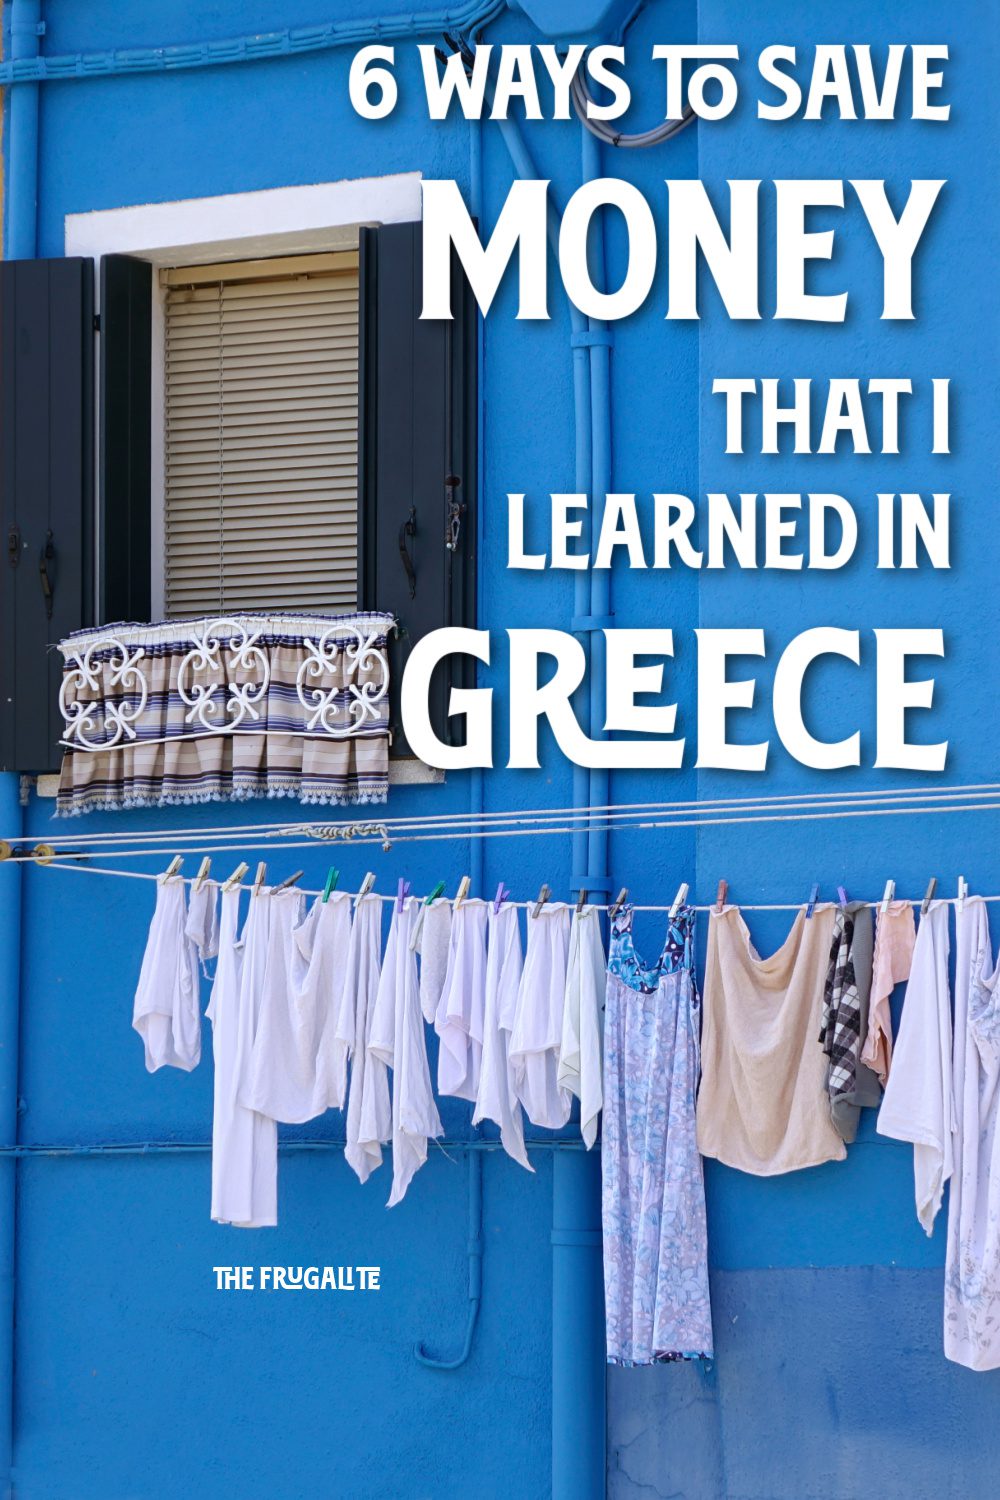 6 Ways to Save Money That I Learned in Greece